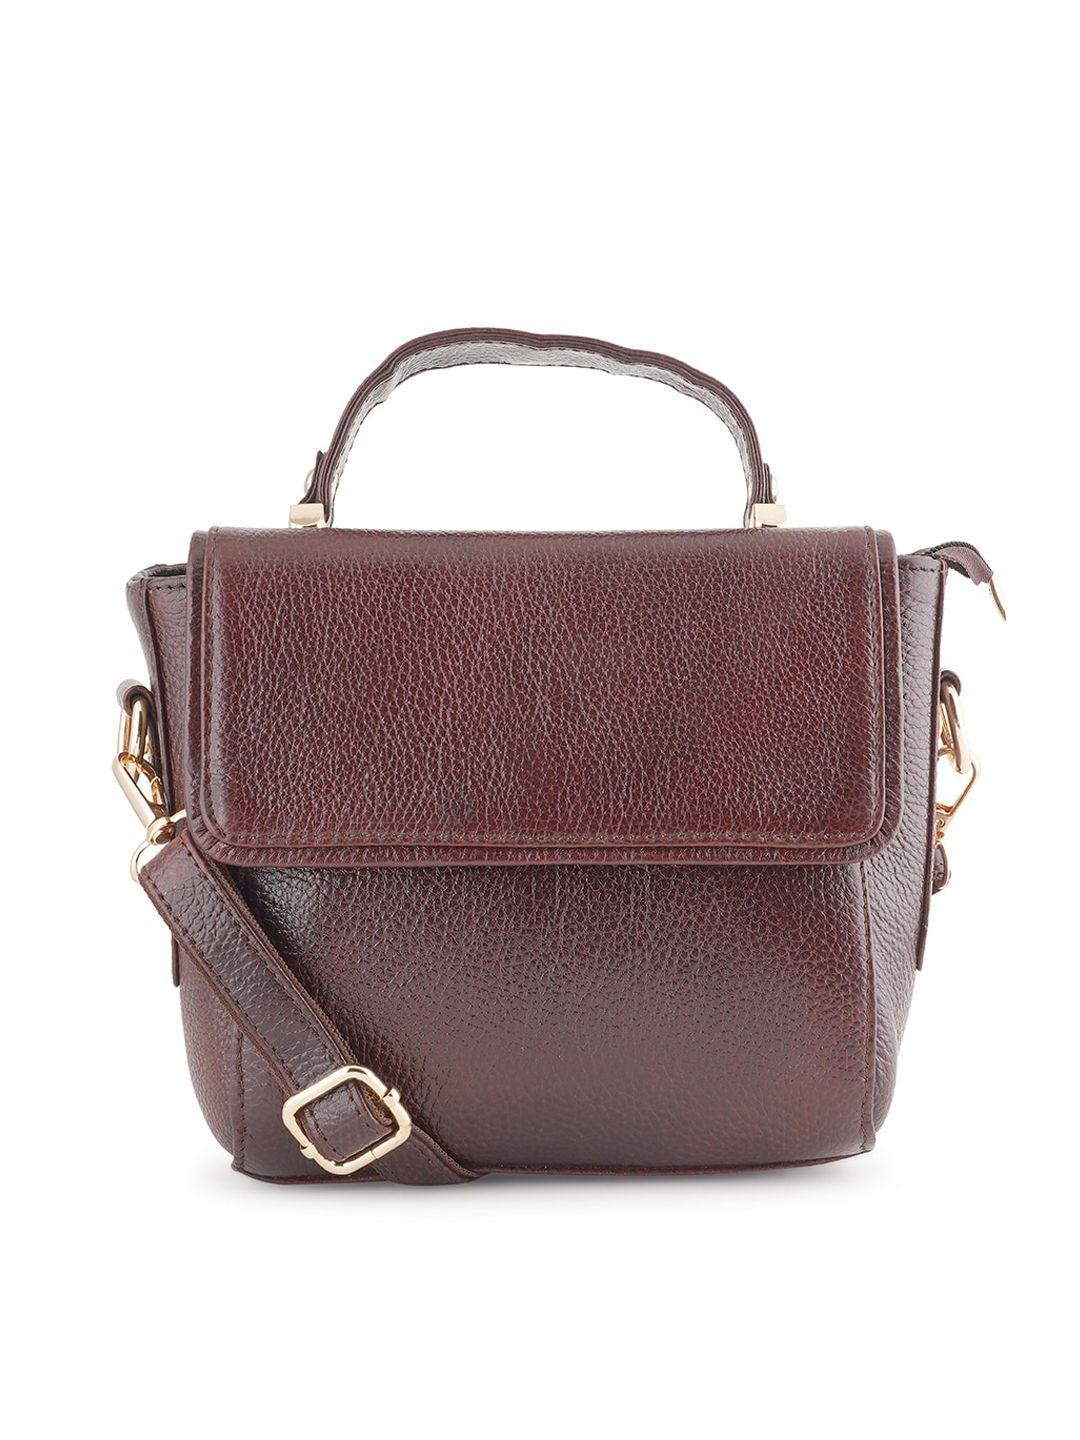 style shoes textured leather structured satchel